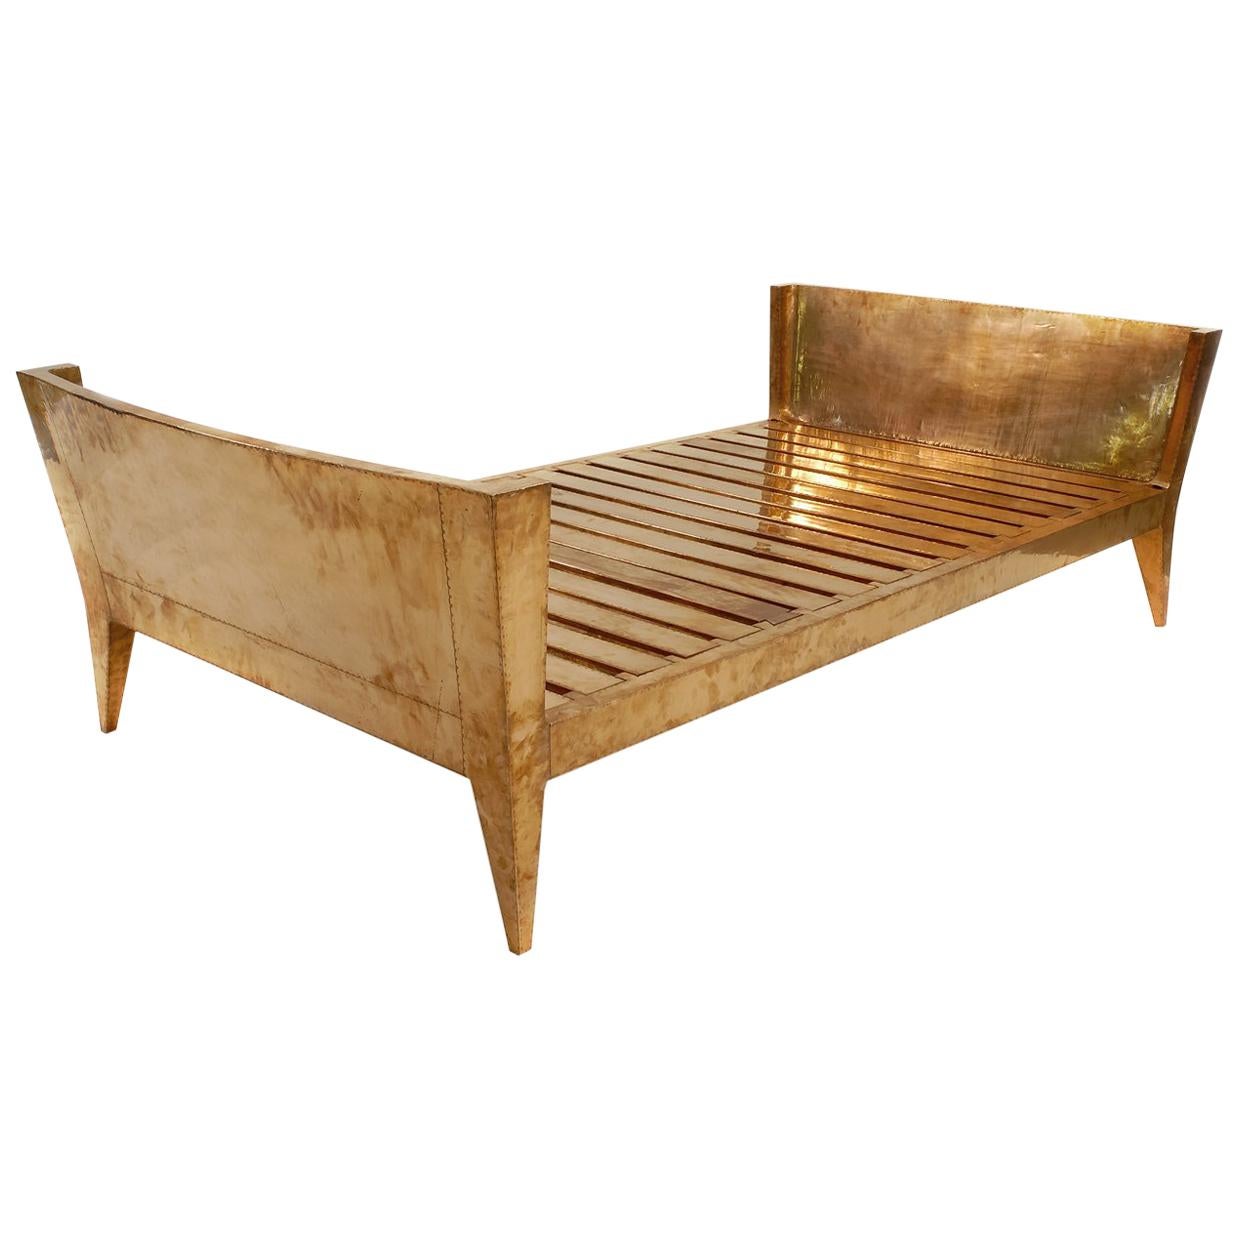 Daybed in Louis XVI Style designed by Paul Mathieu. The earliest examples of the Daybed have been found in Egyptian tombs of the 1stDynasty (3100 BC). The renowned designer Paul Mathieu has re-interpreted this classic form. Paul’s low, curvaceous